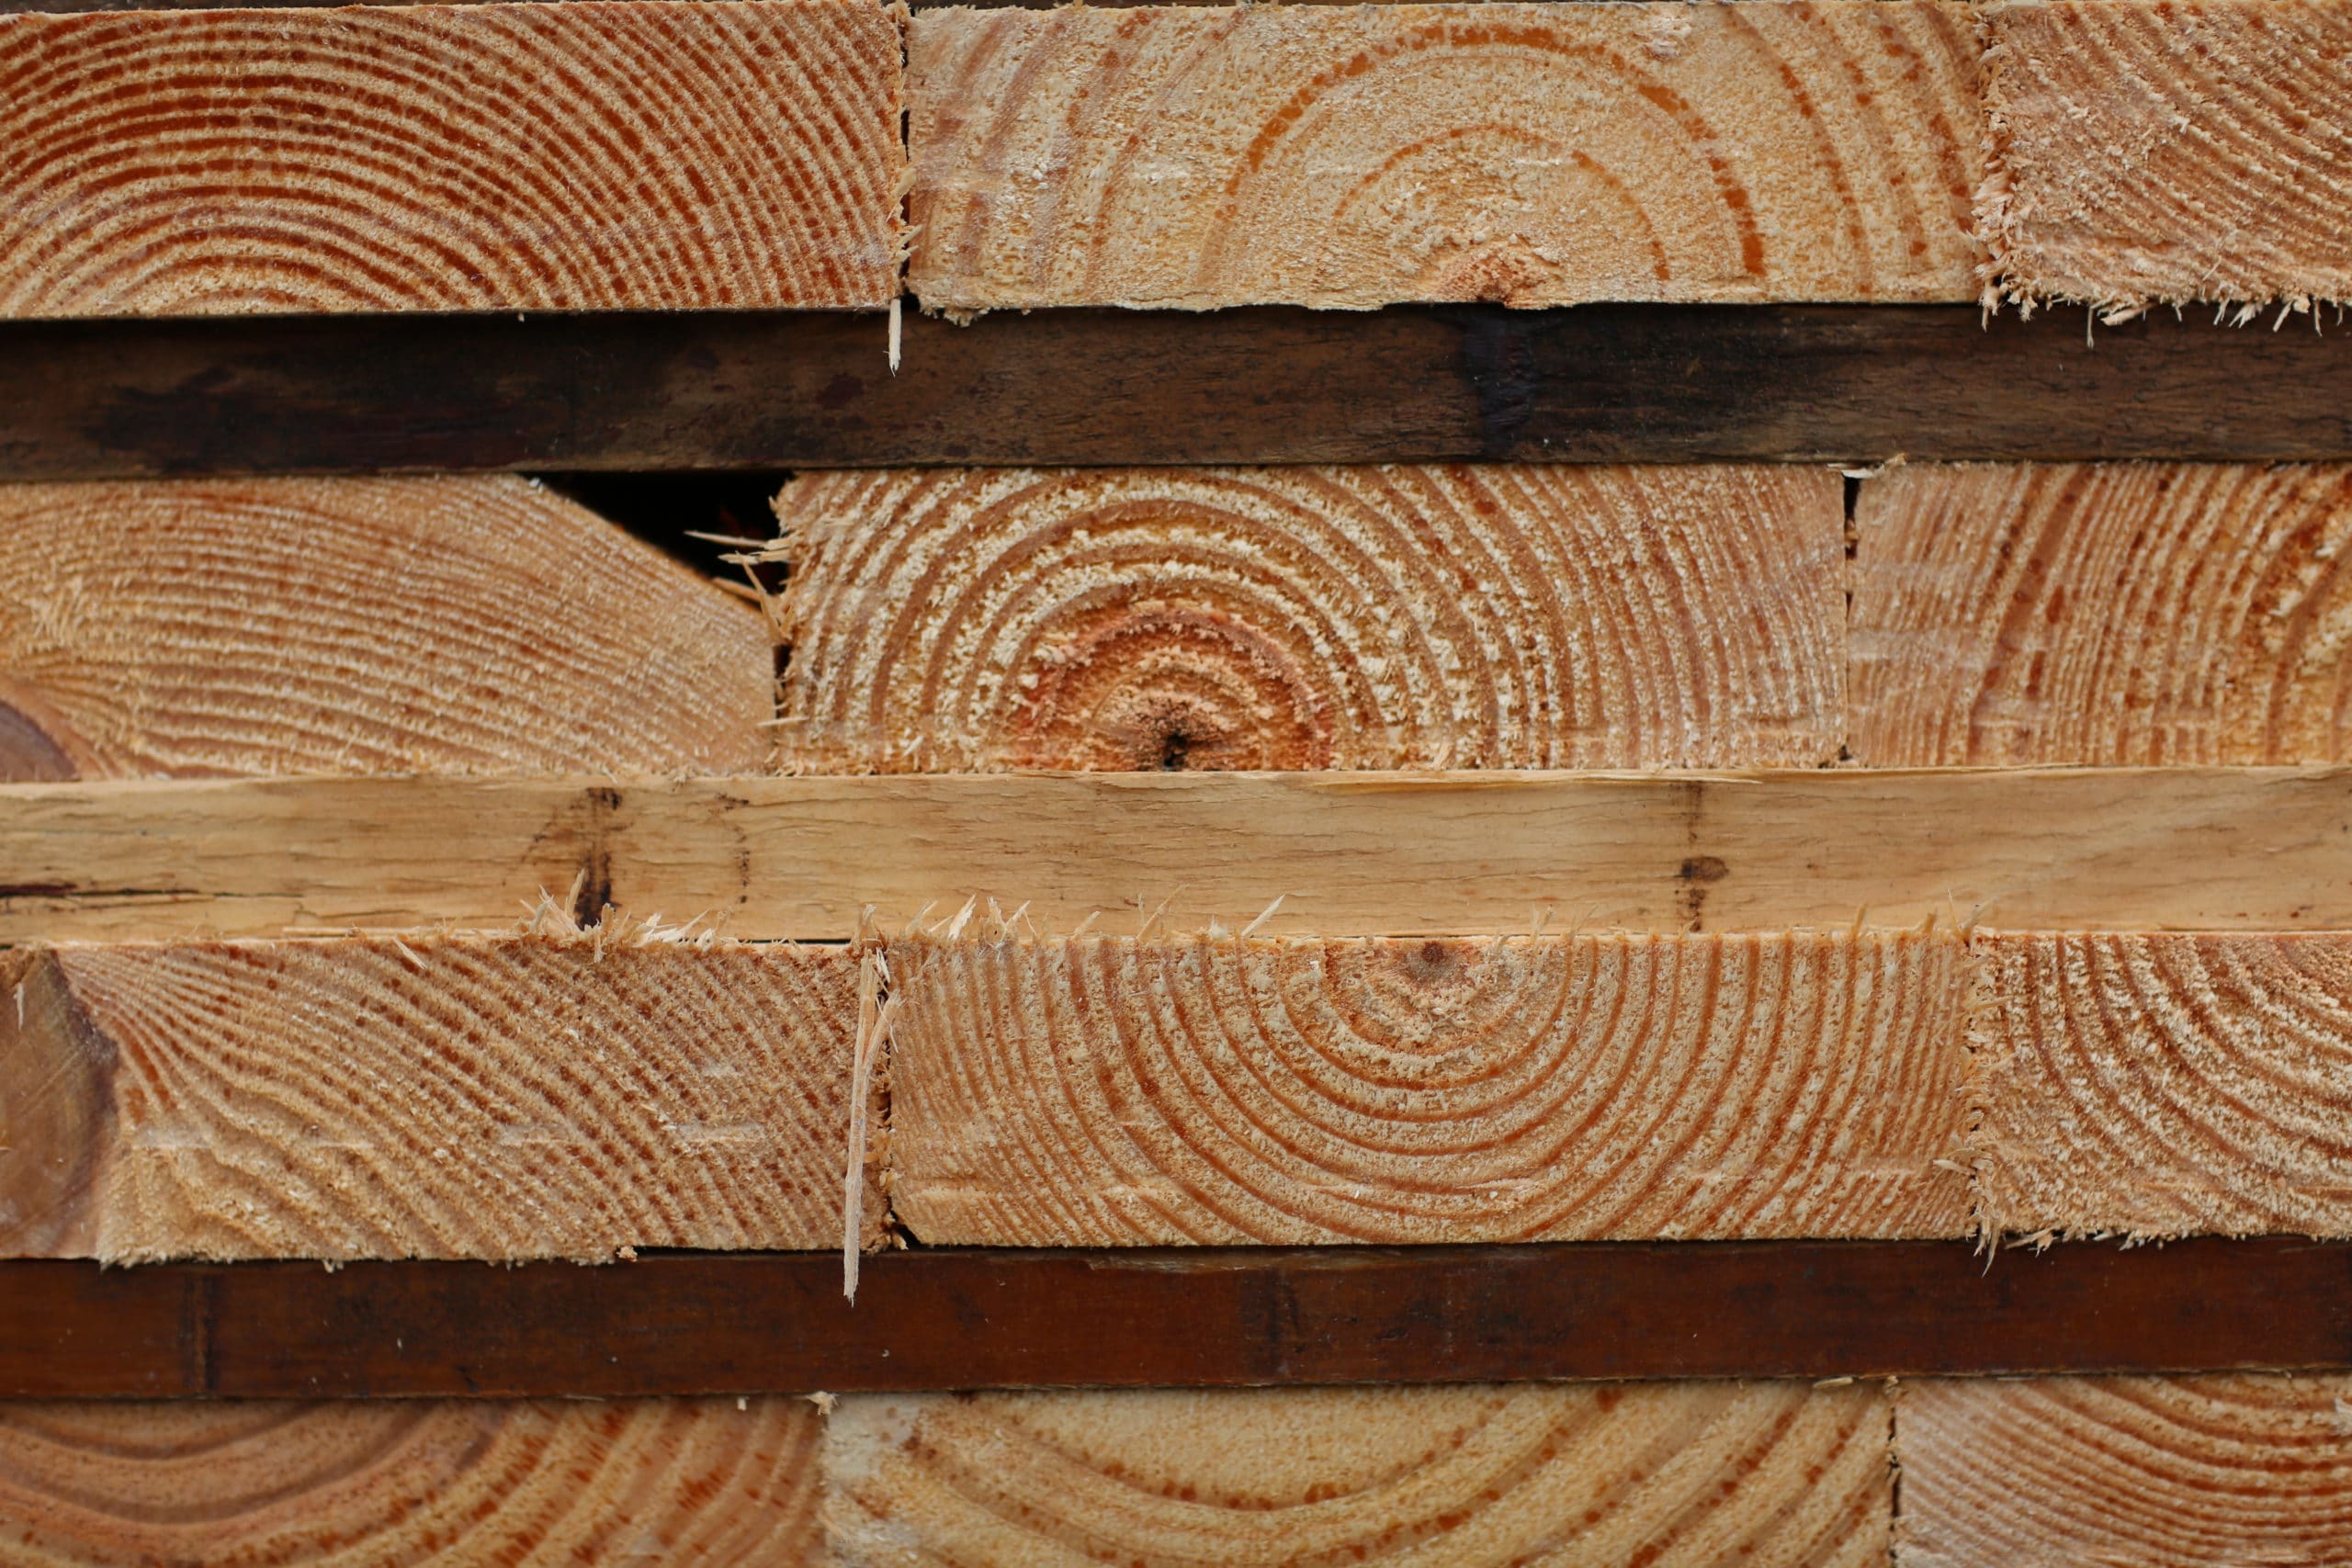 Science, Tech, Engineering, Math and…Lumber. Here’s How.